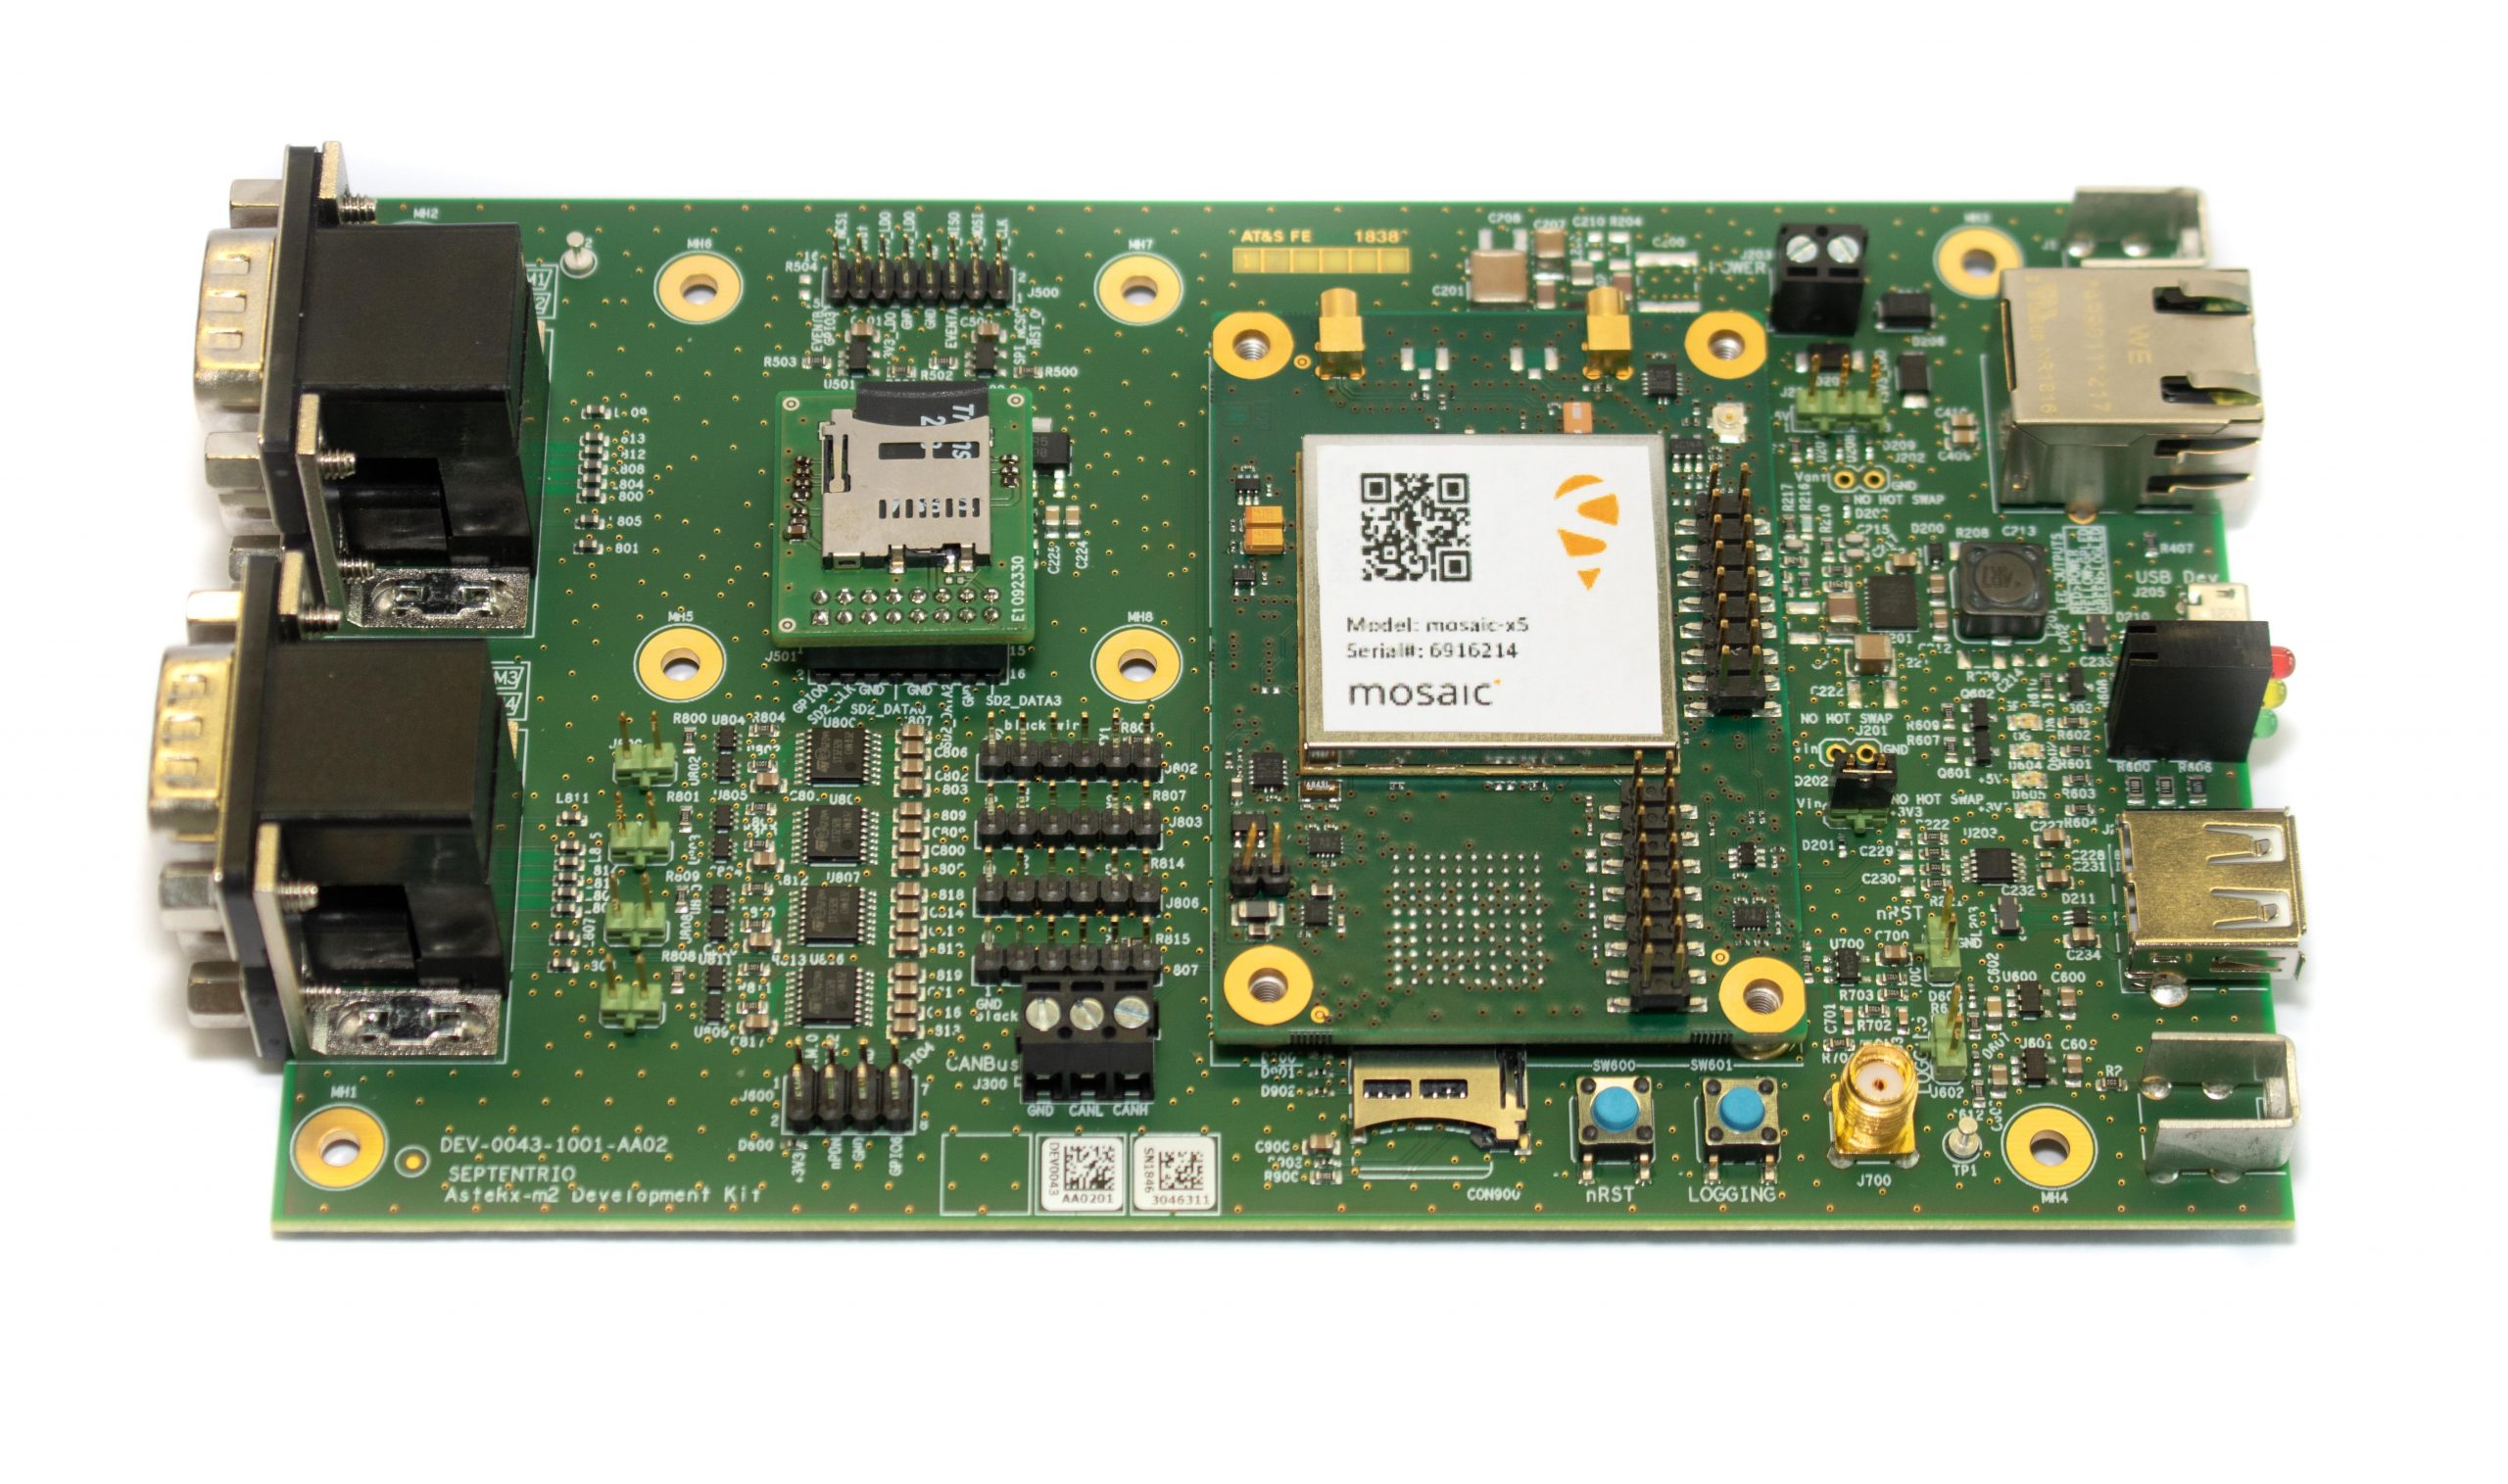 First dev-kits available for mosaic, Septentrio’s new high-precision GNSS module